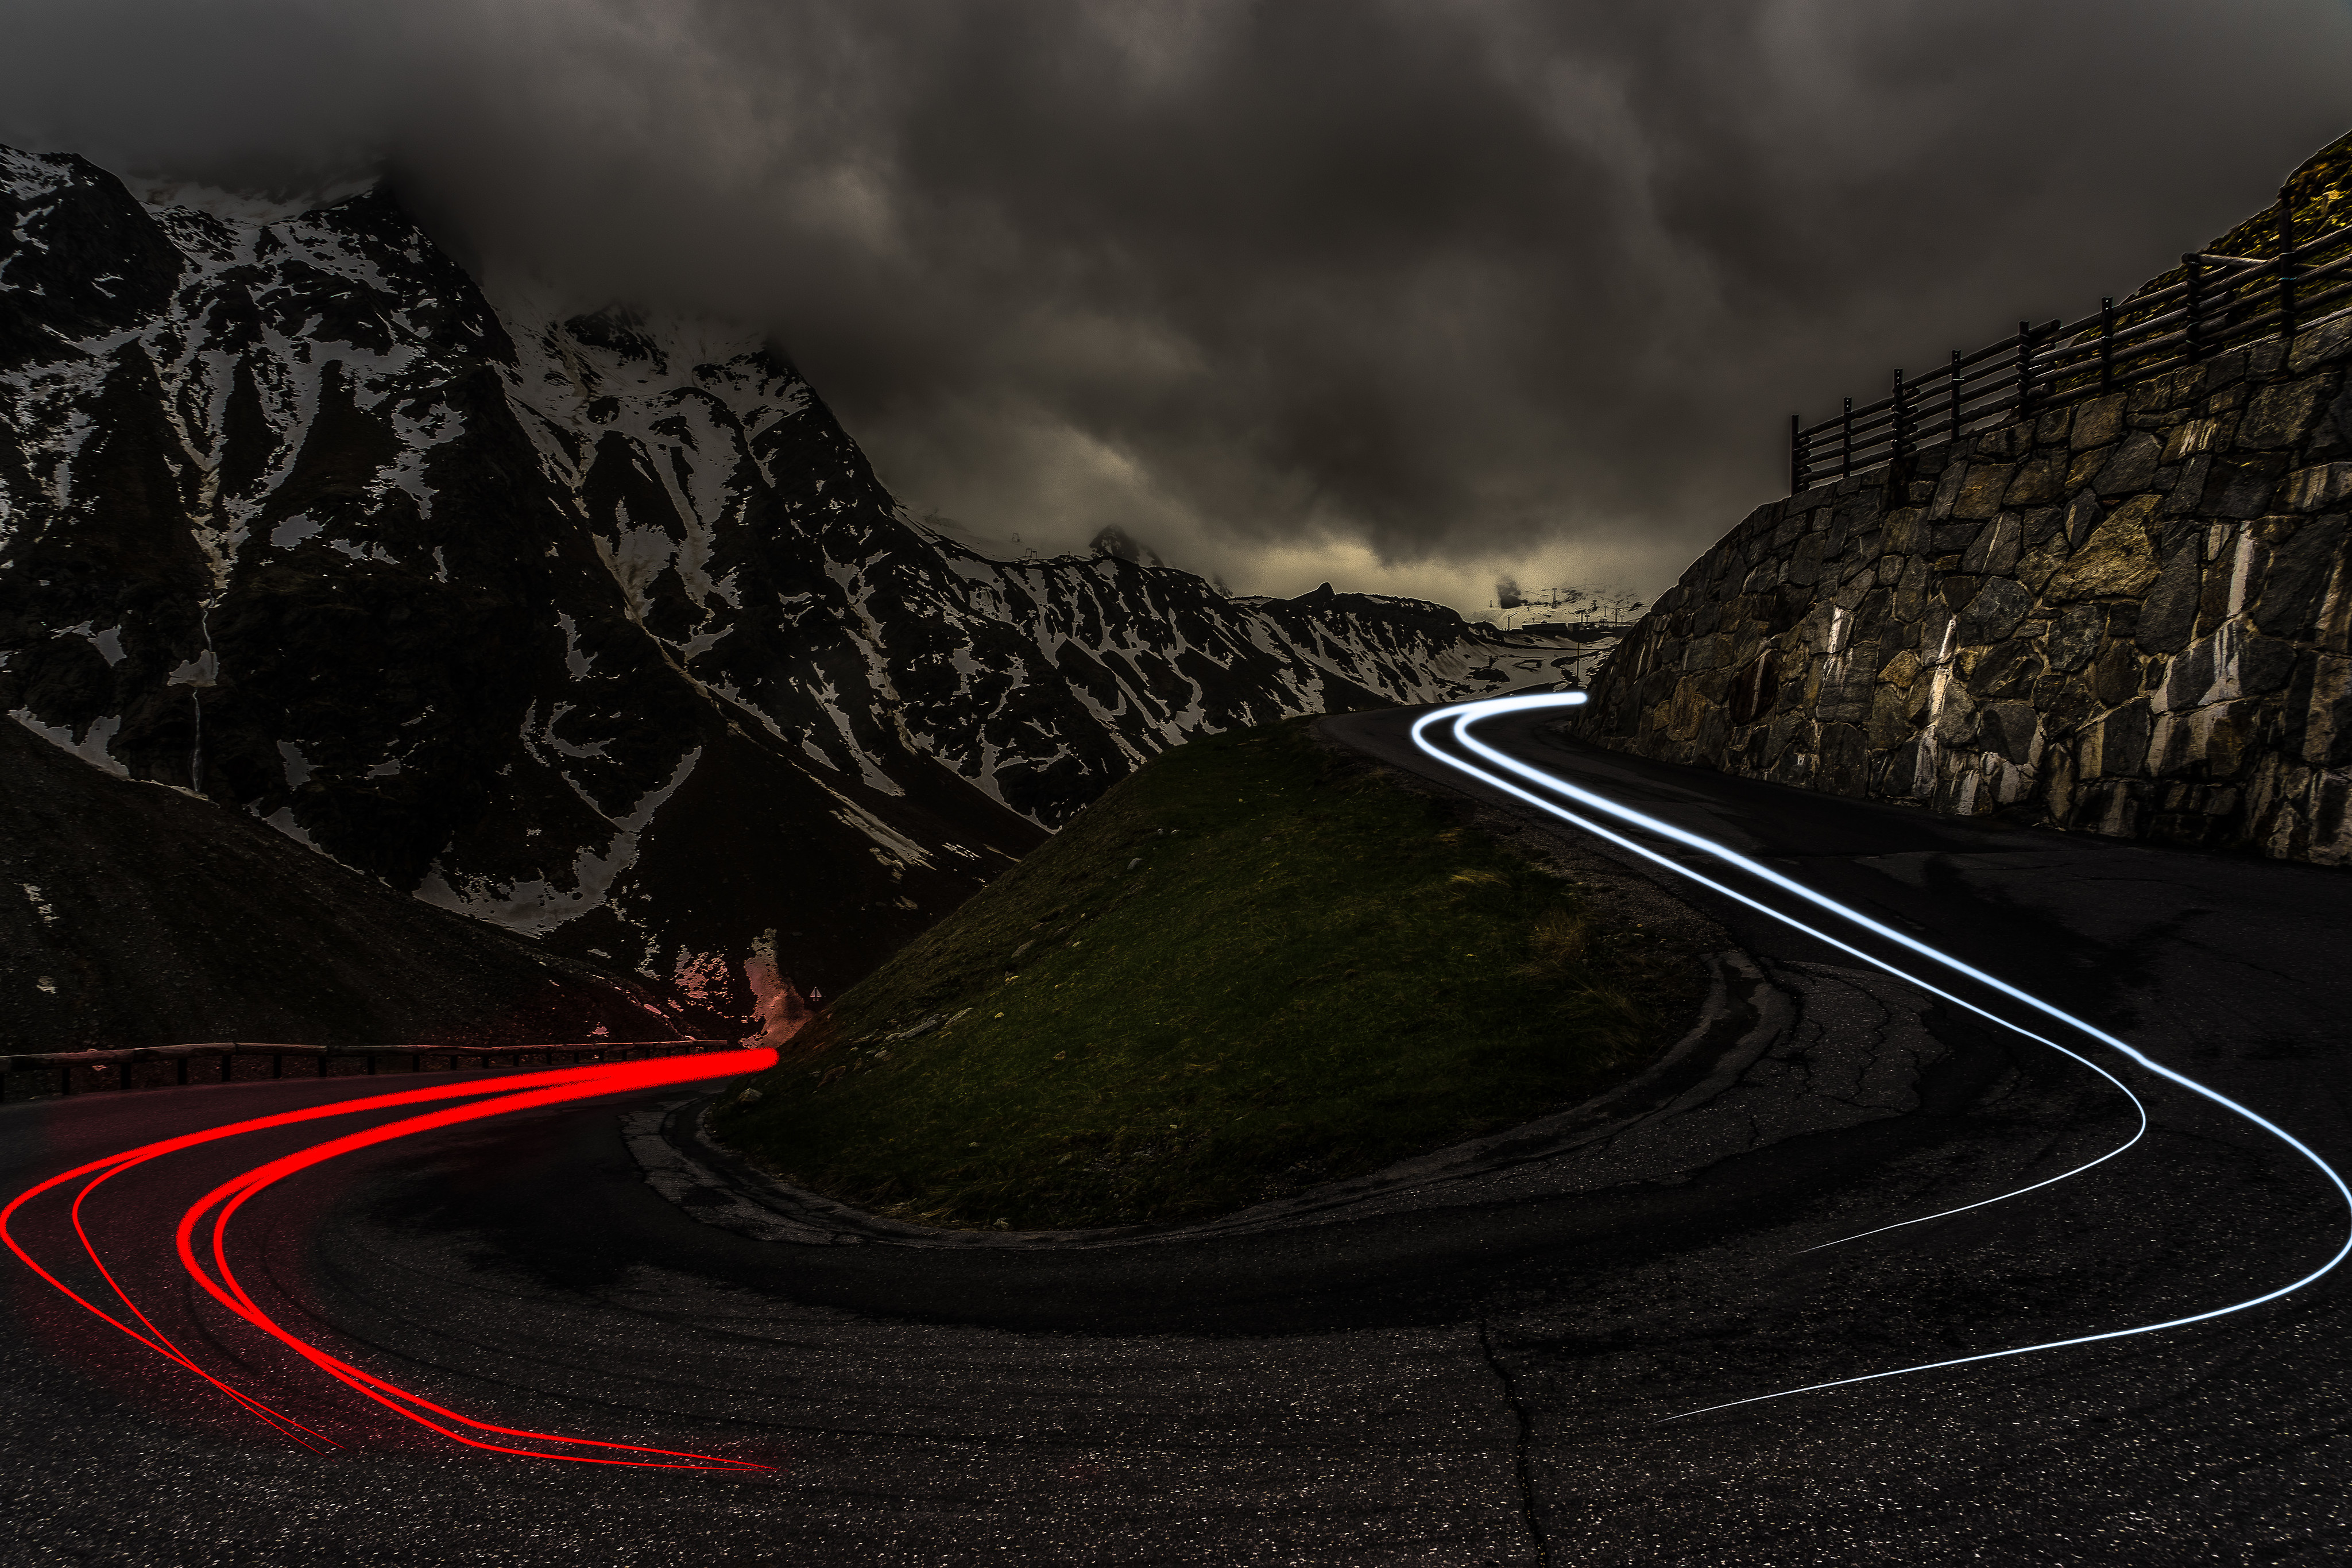 General 4096x2731 road mountain view night mountains clouds snow hairpin turns low light